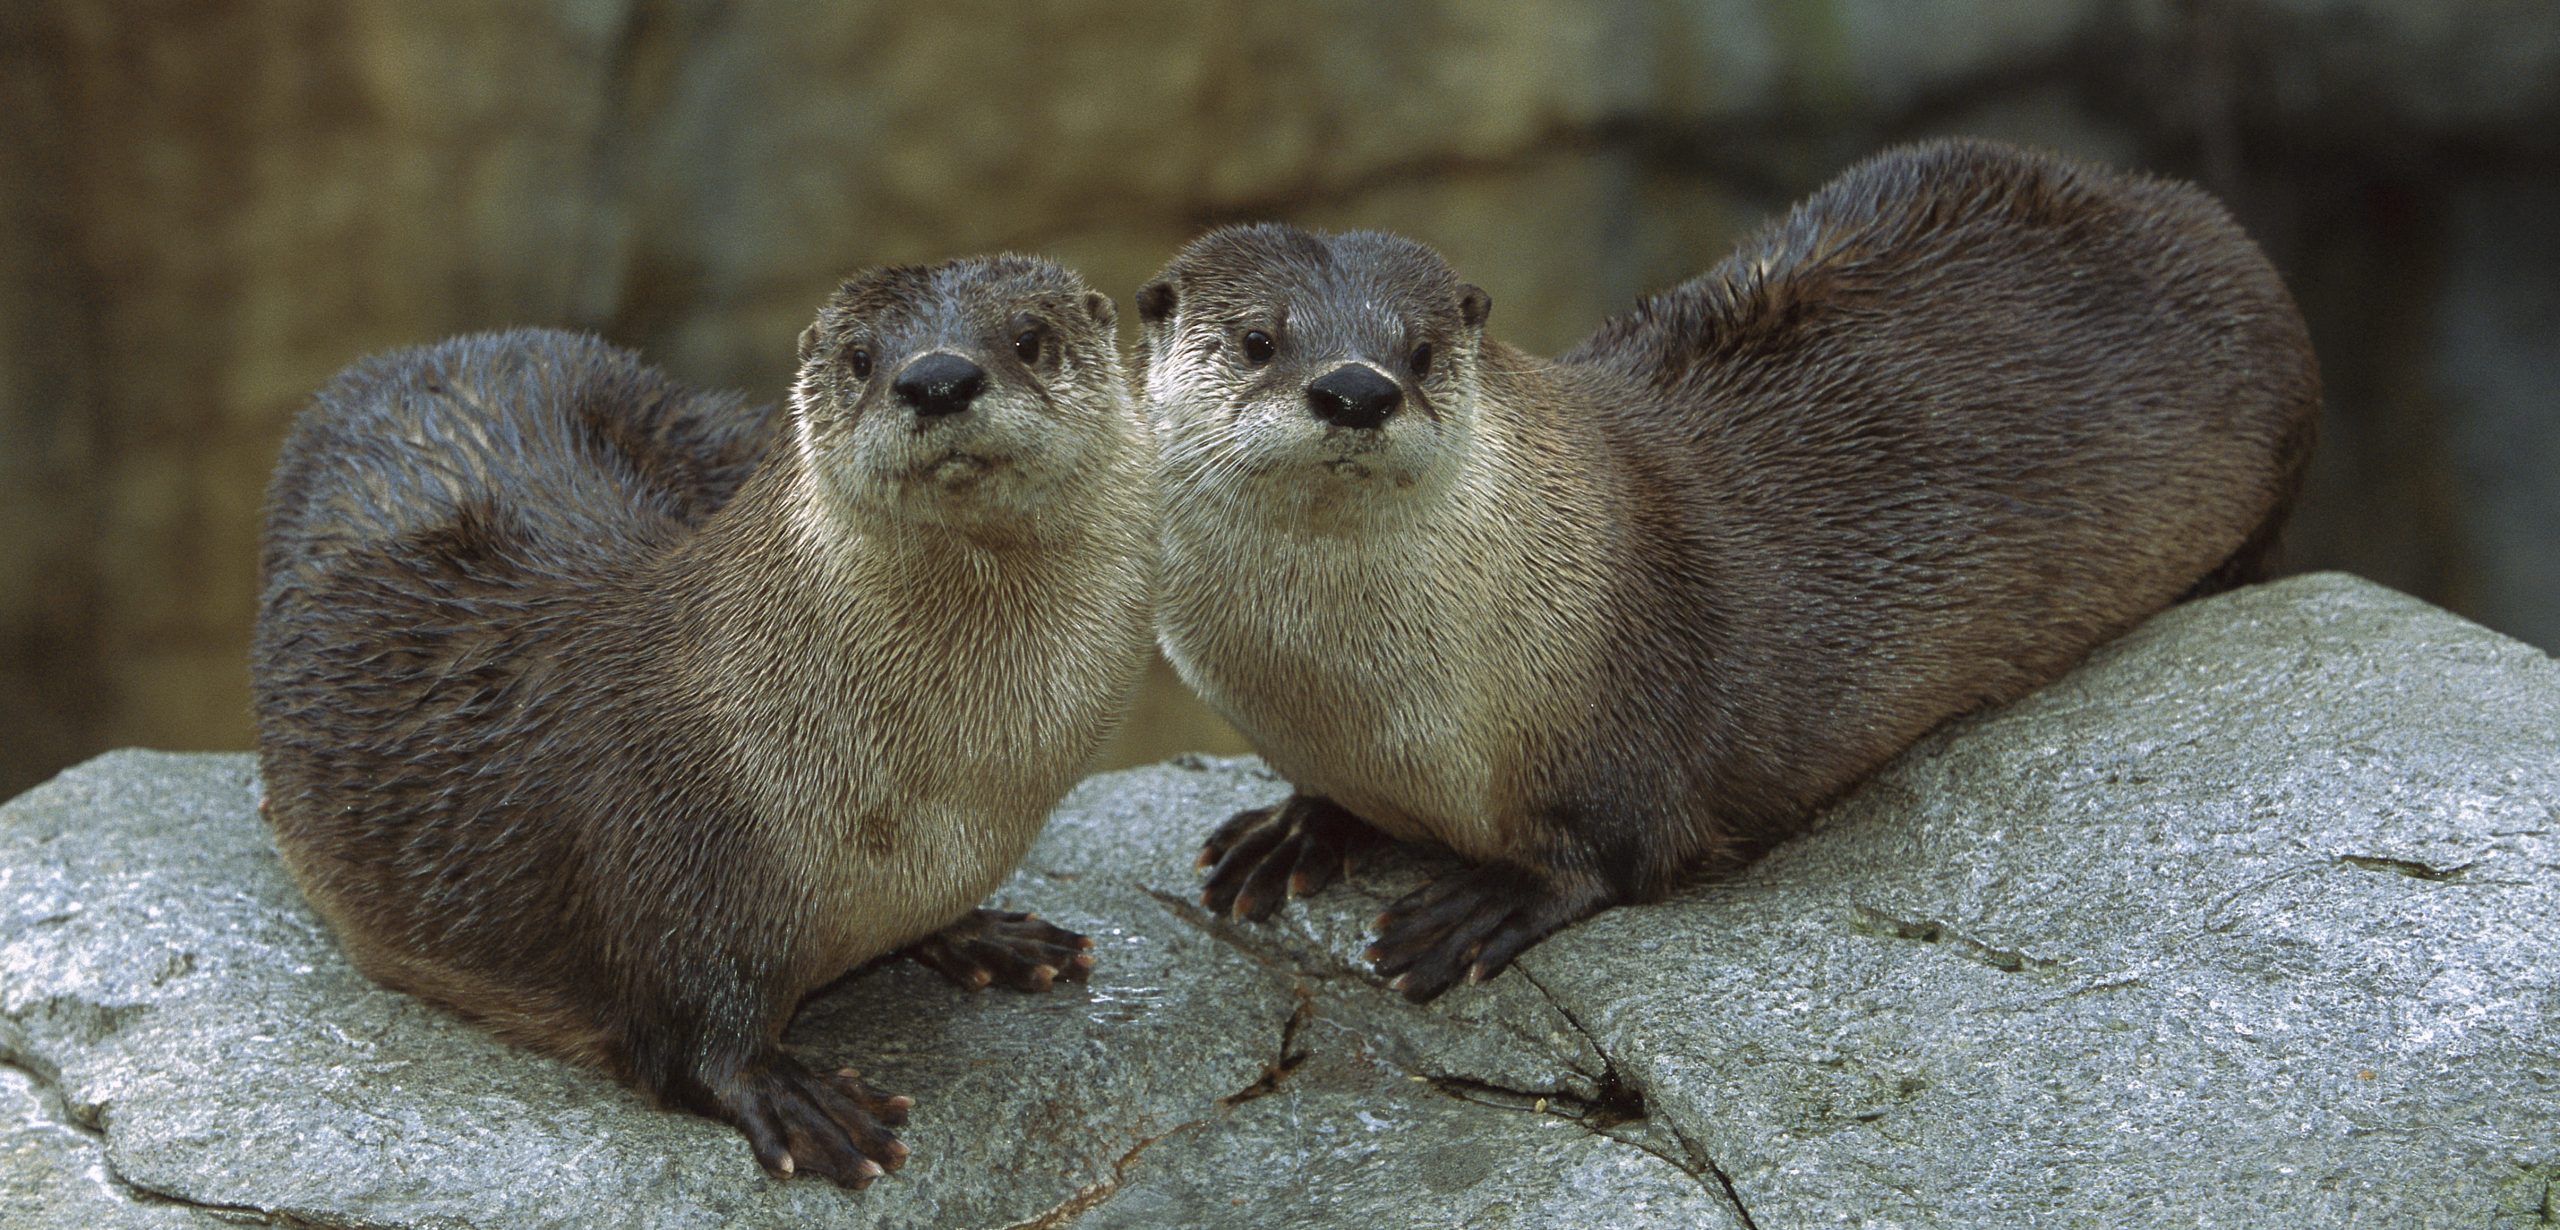 North American river otters are slowly making their way back to the Bay Area. Photo by ZSSD/Minden Pictures/Corbis